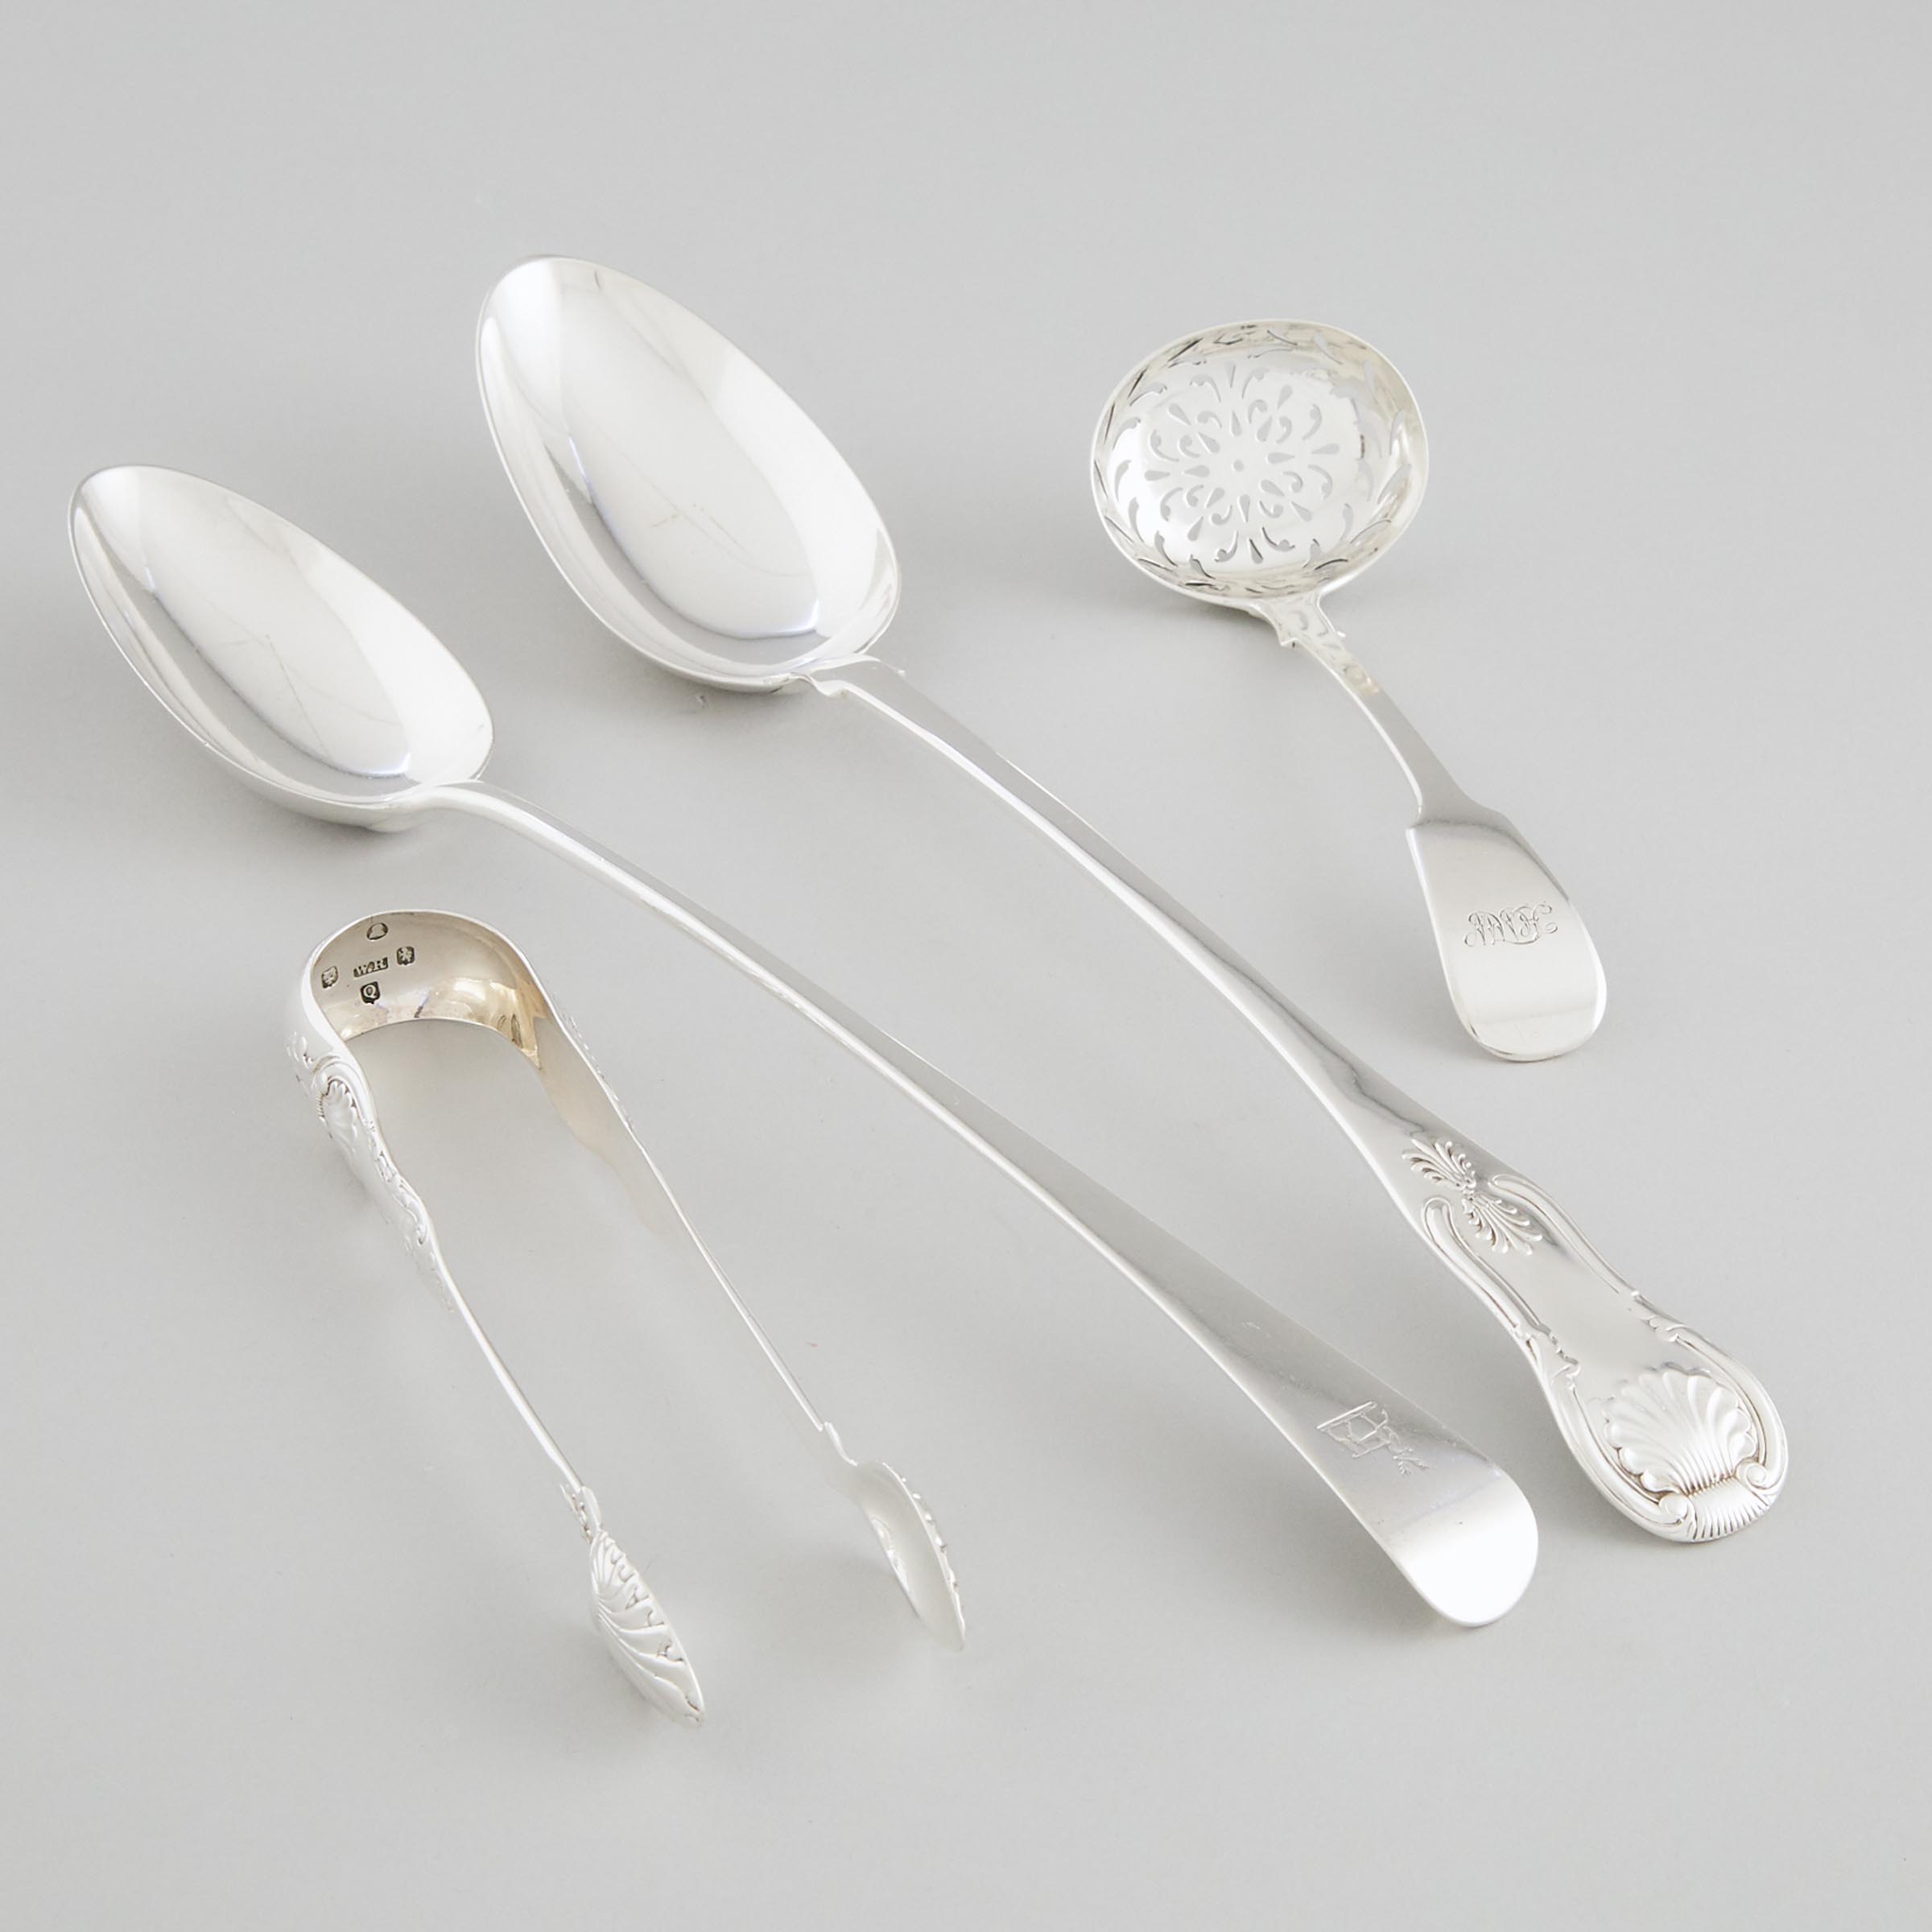 Two Georgian Silver Serving Spoons, William Sumner I, London, 1801 and Marshall & Sons, Edinburgh, 1821, Sugar Tongs, William Russell II, Glasgow, 1833, and a Sifting Ladle, William Bateman II, London, 1835